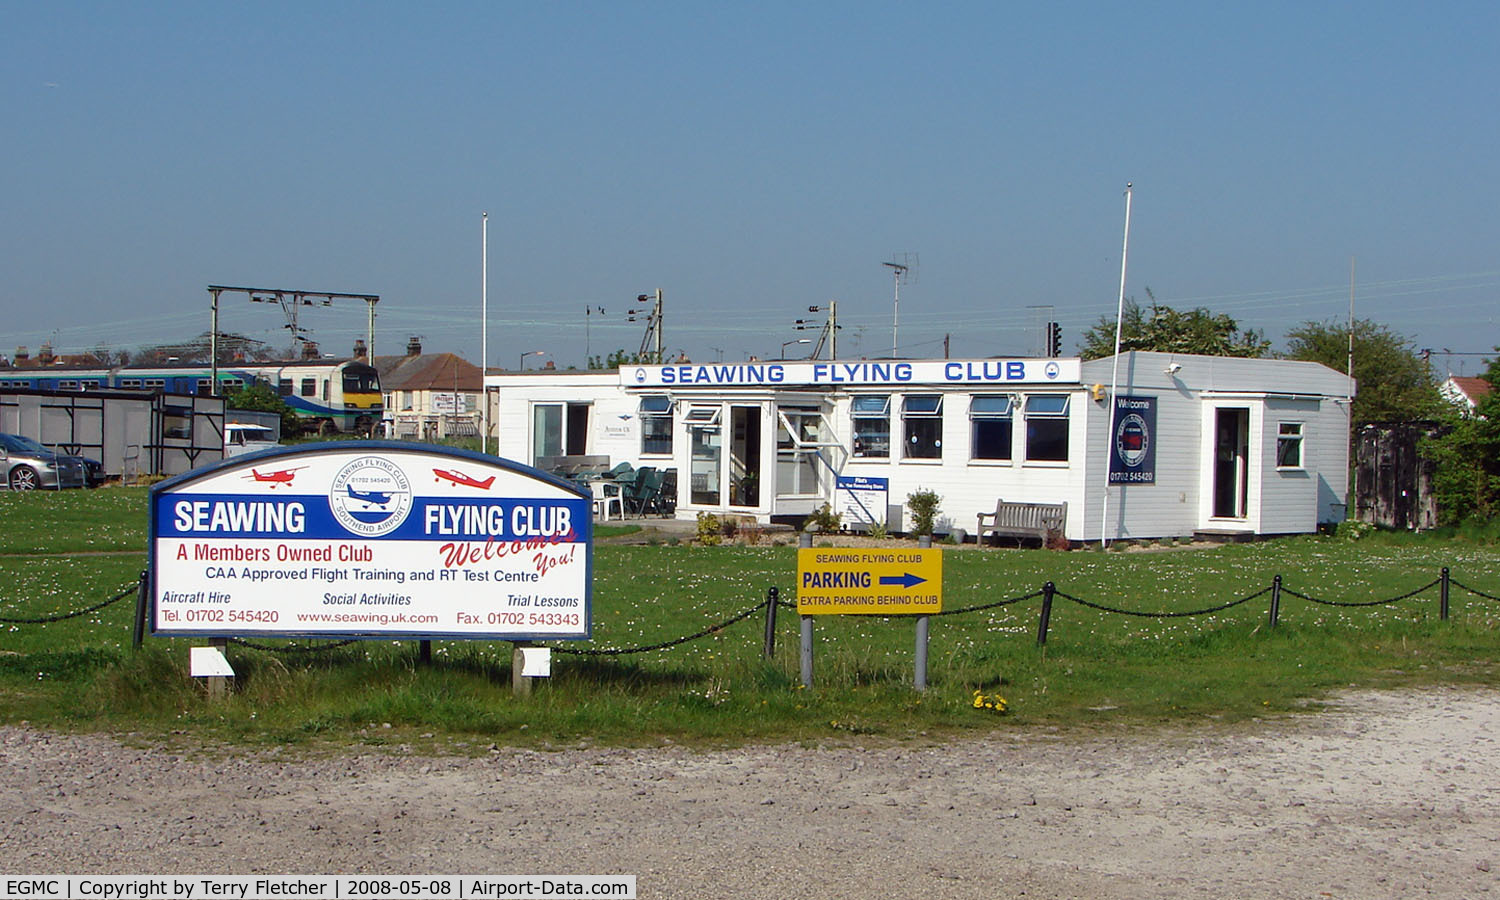 London Southend Airport, Southend-on-Sea, England United Kingdom (EGMC) - Seawing Flying Club on the Eastern perimeter of Southend Airport